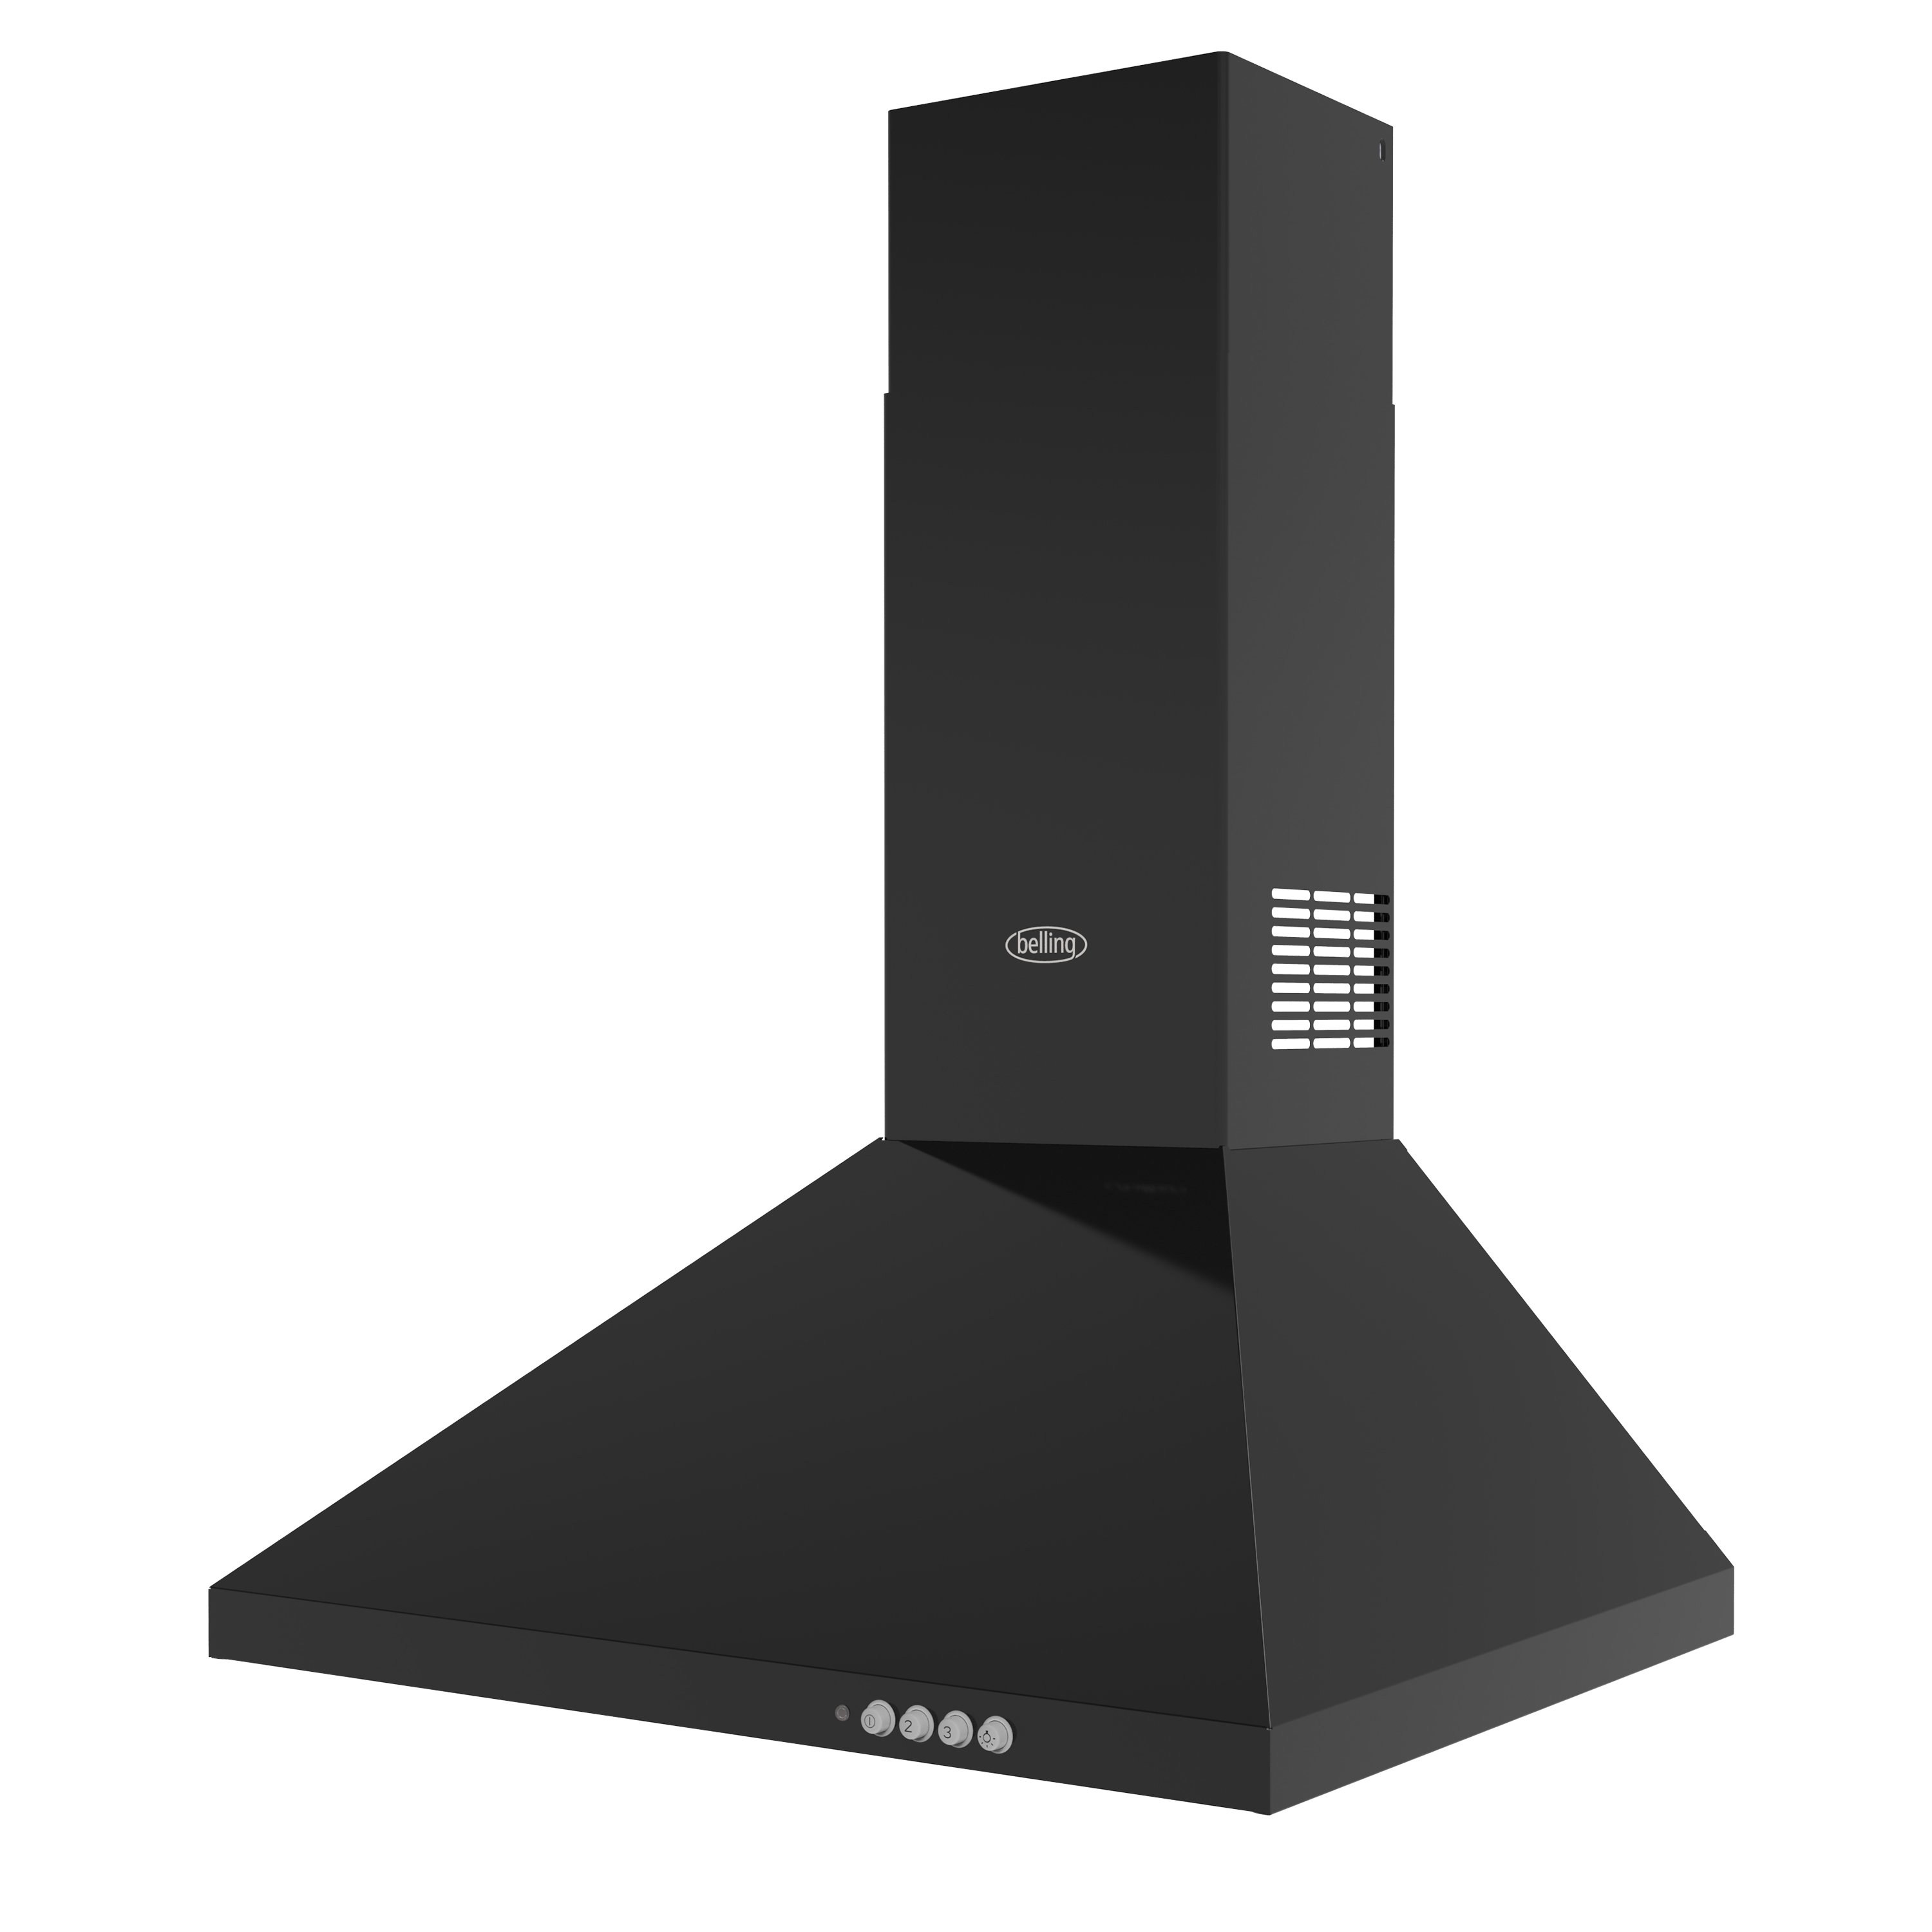 60cm Chimney hood with 3 fan speeds, 2 LED lights, 2 washable grease filters and extendable chimney section